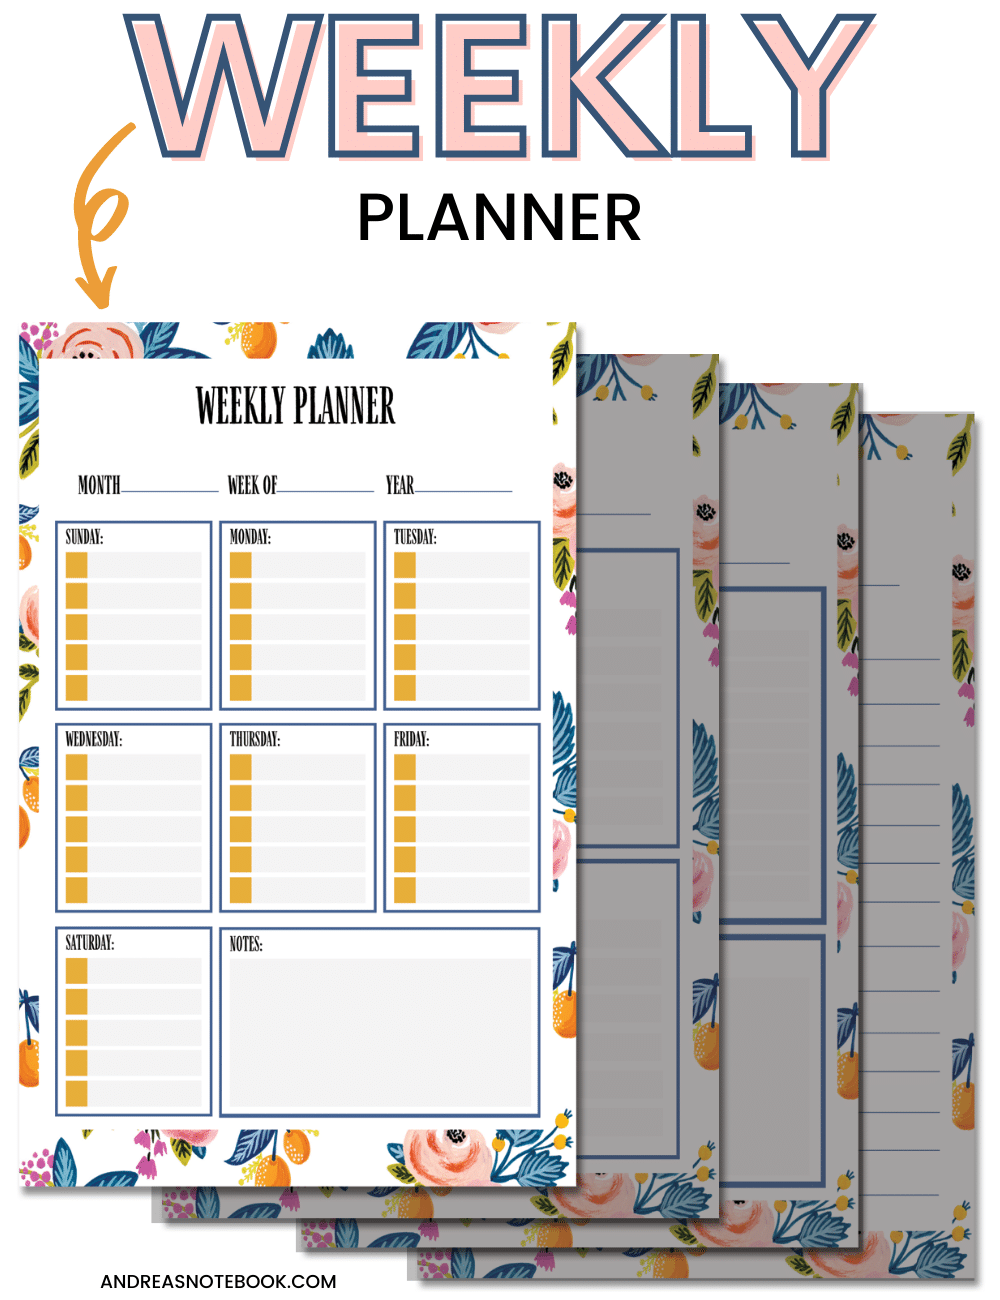 free planner - image of 4 free planner sheets on top of one another- highlighting weekly cute free planner sheet